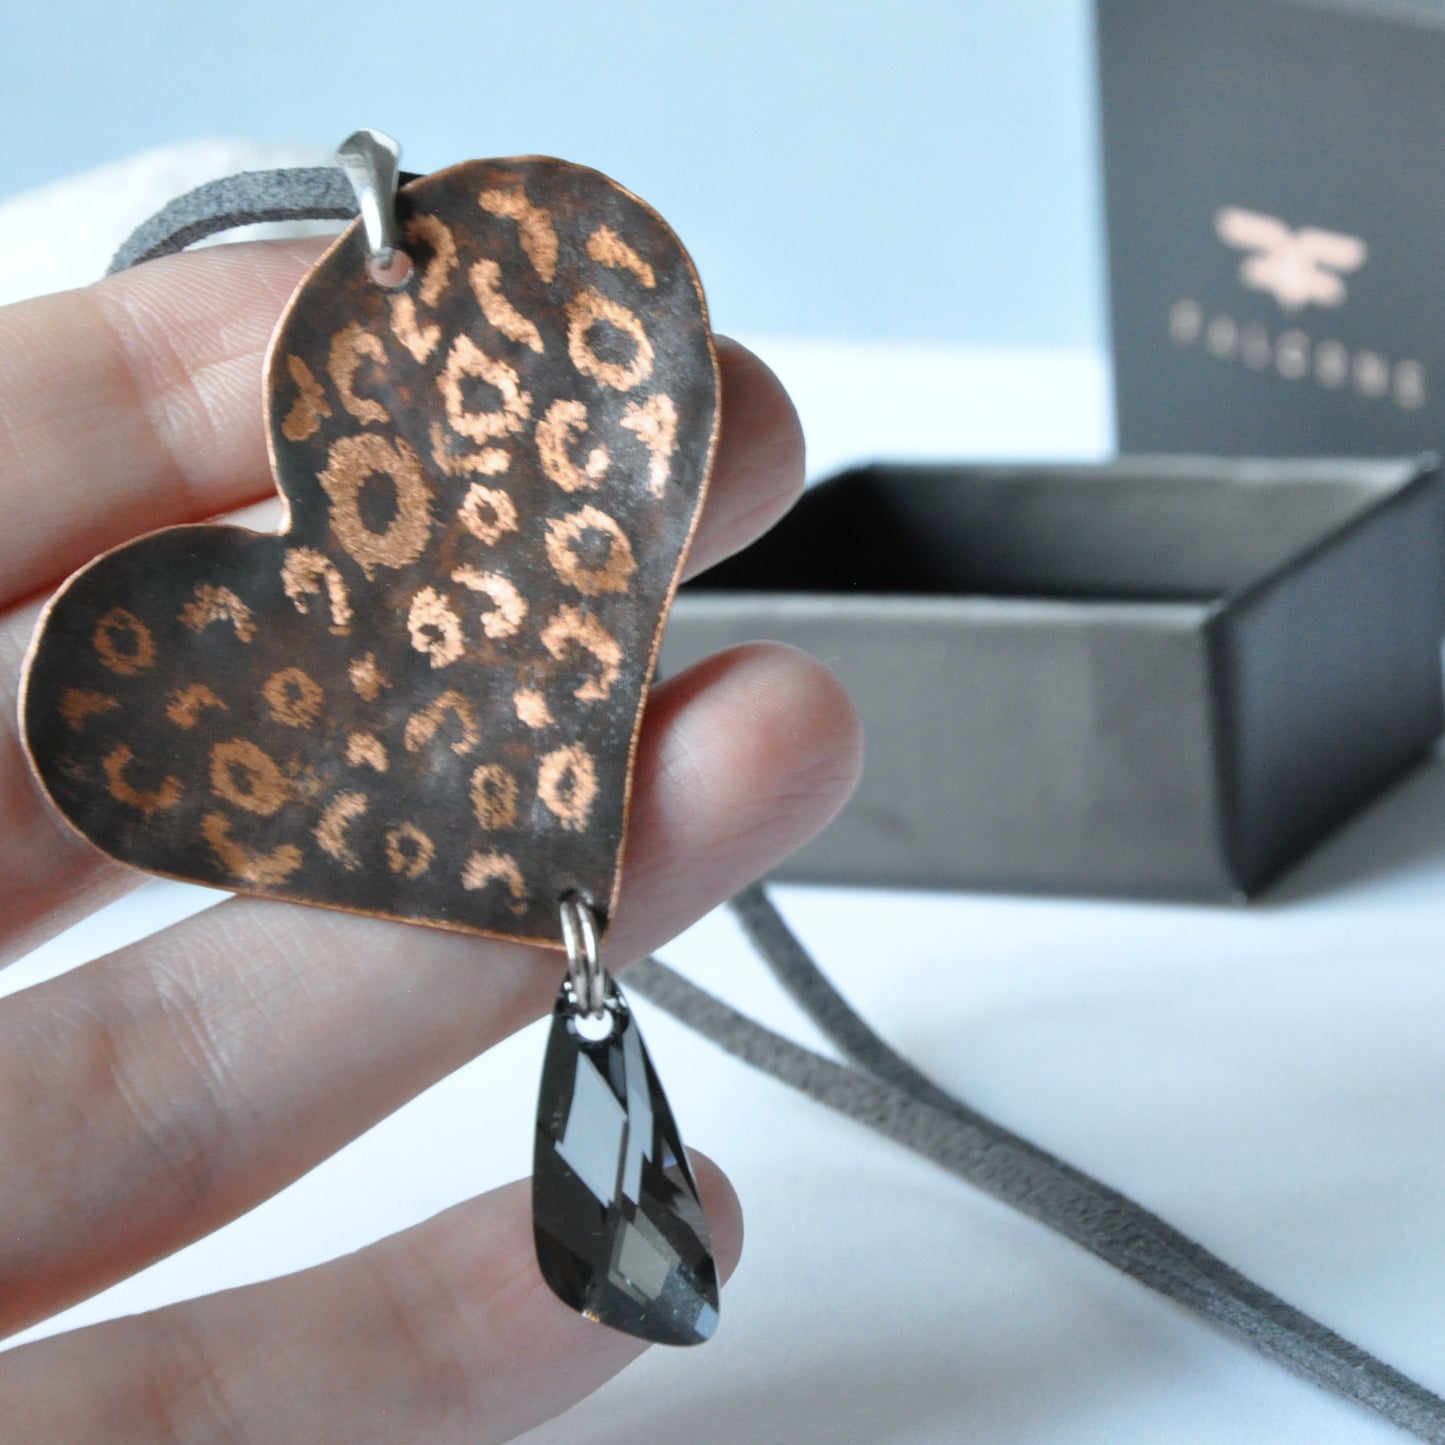 Copper Heart Pendant Necklace with Leopard Spotted Engraving and Swarovski Crystal 'Wild Heart'